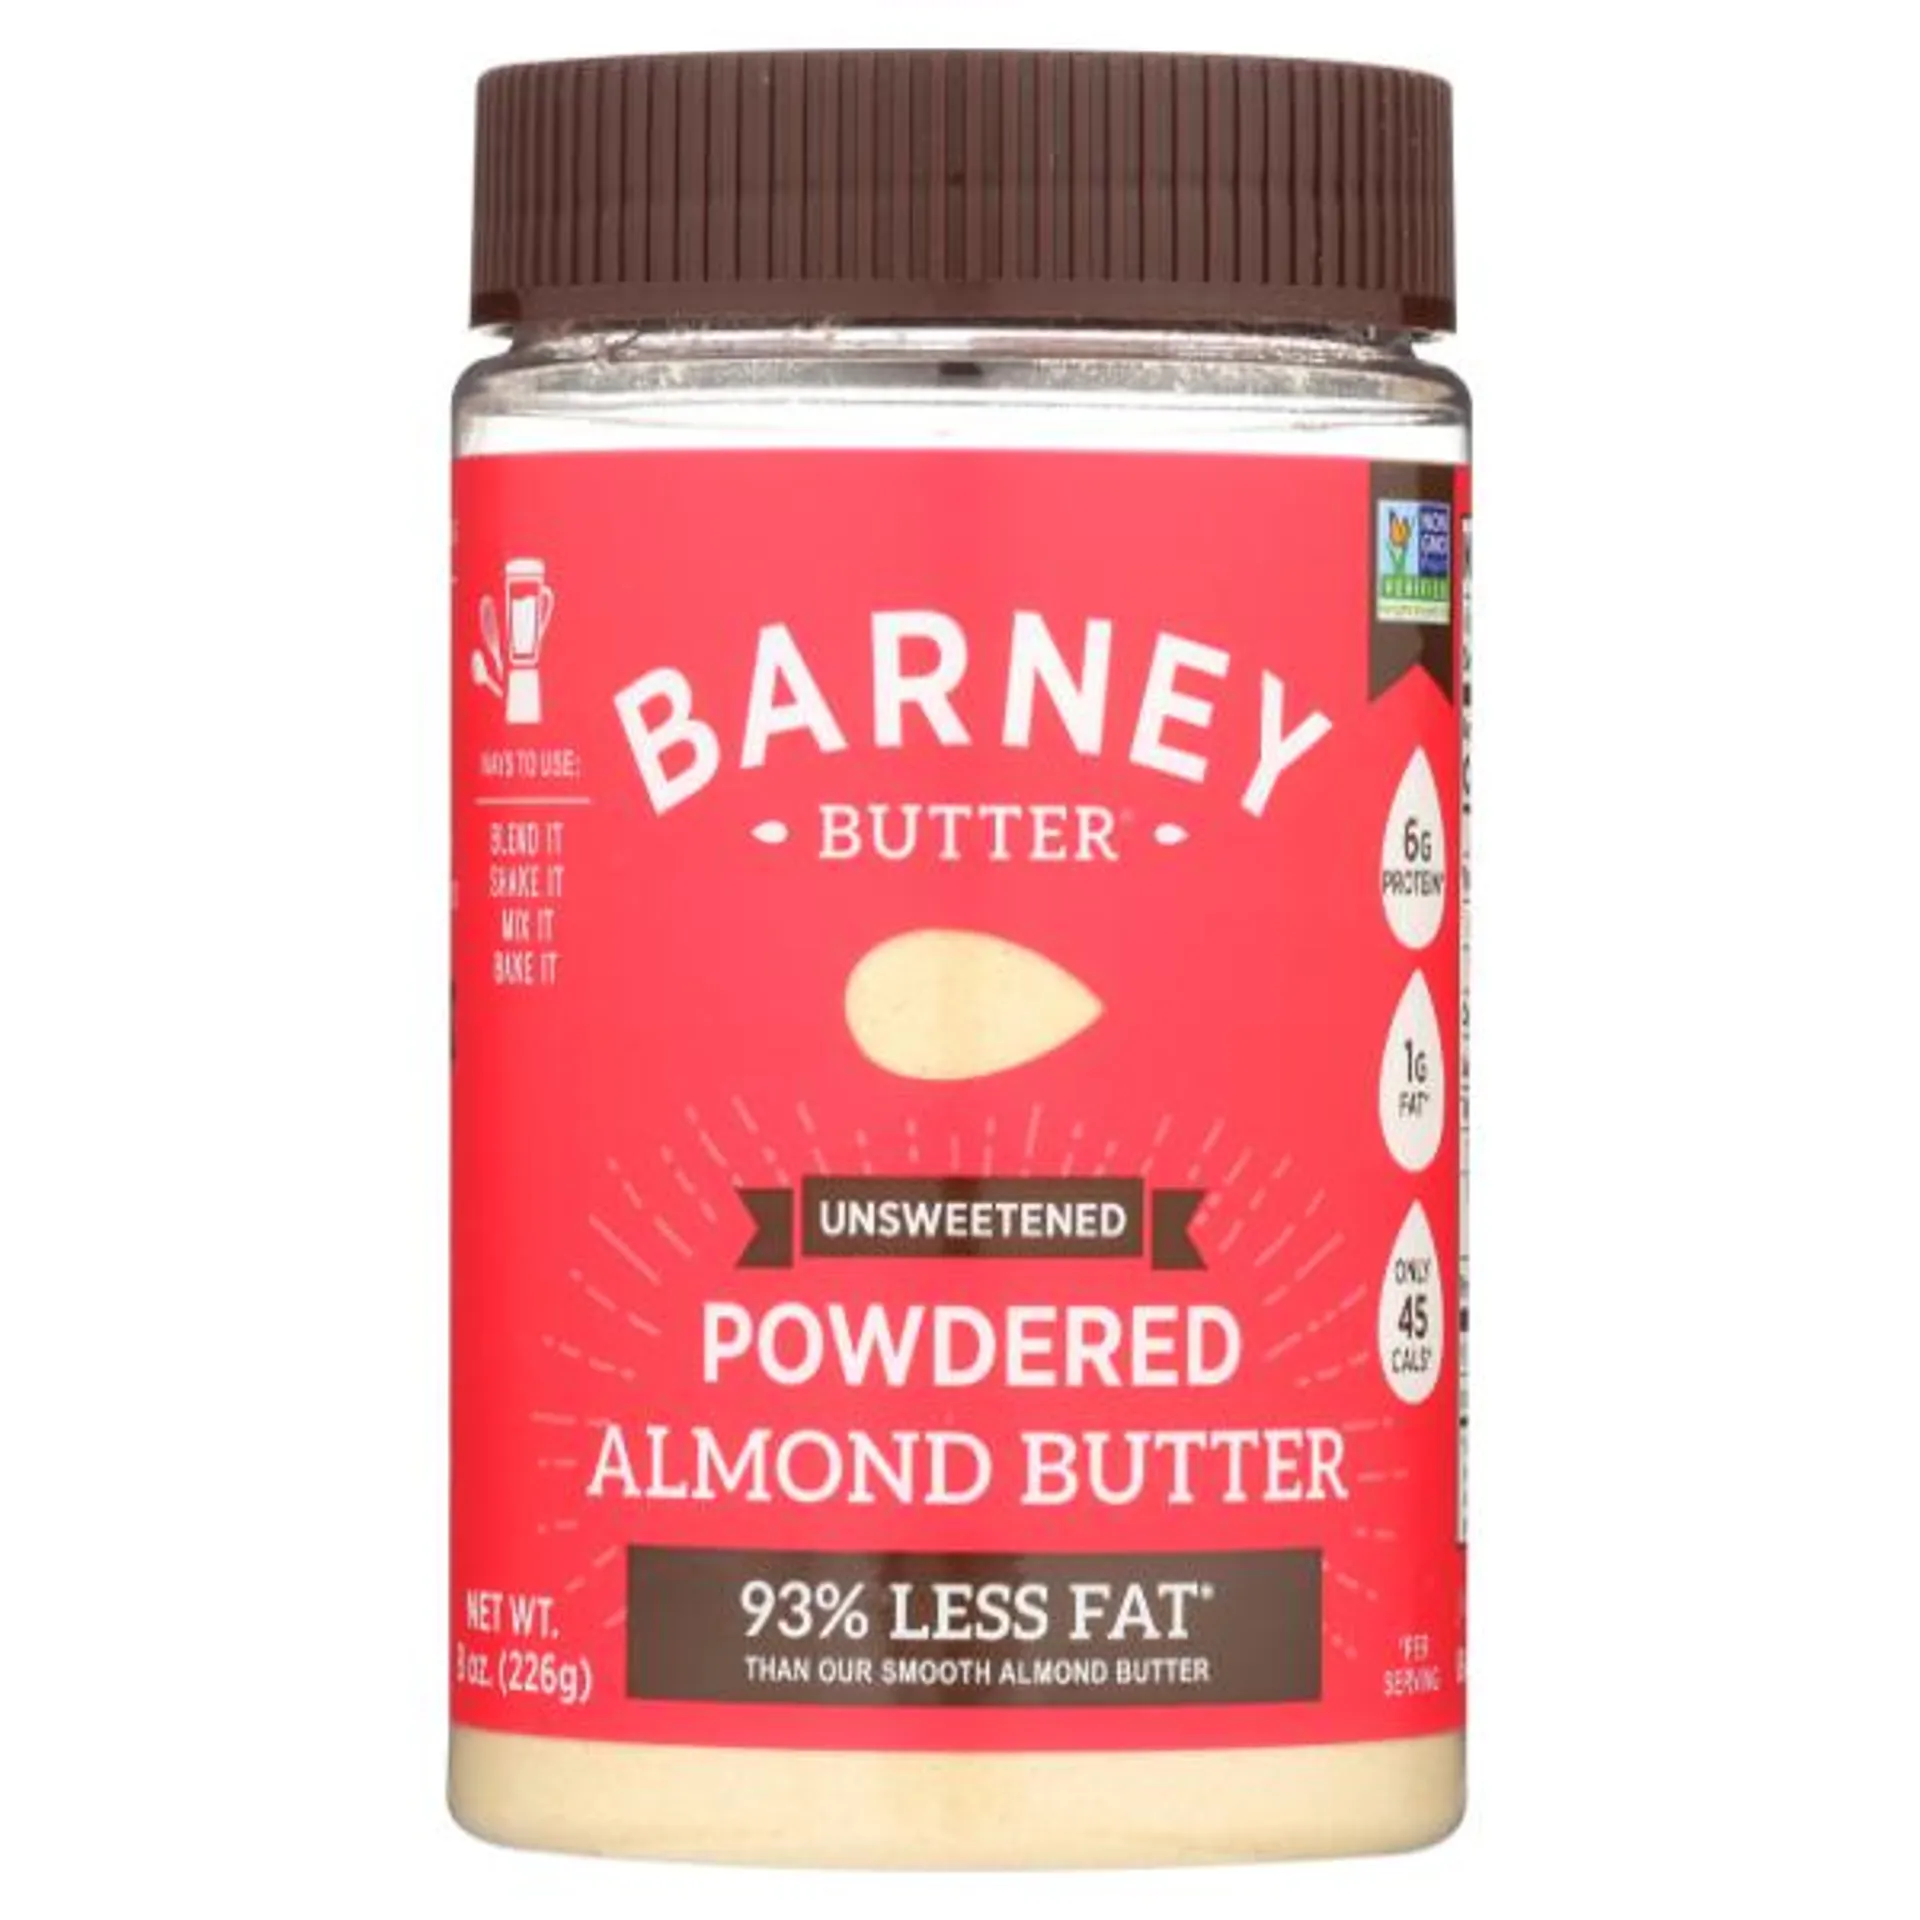 Barney Butter Unsweetened Powdered Almond Butter - 8 Ounce